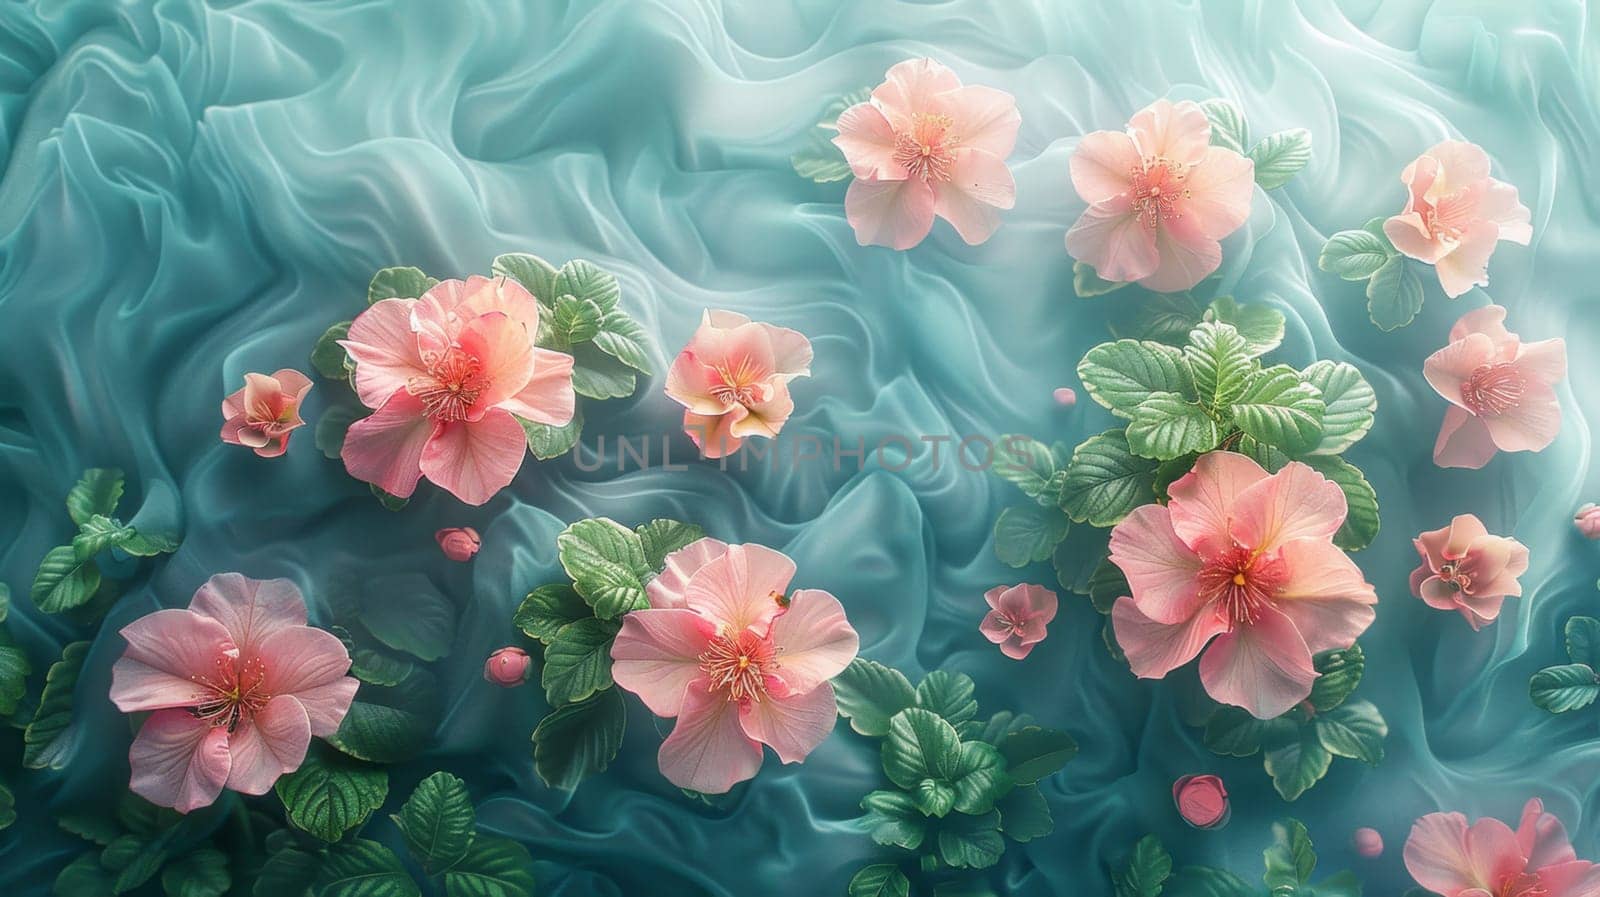 A background of multicolored flowers . Environmental background design.